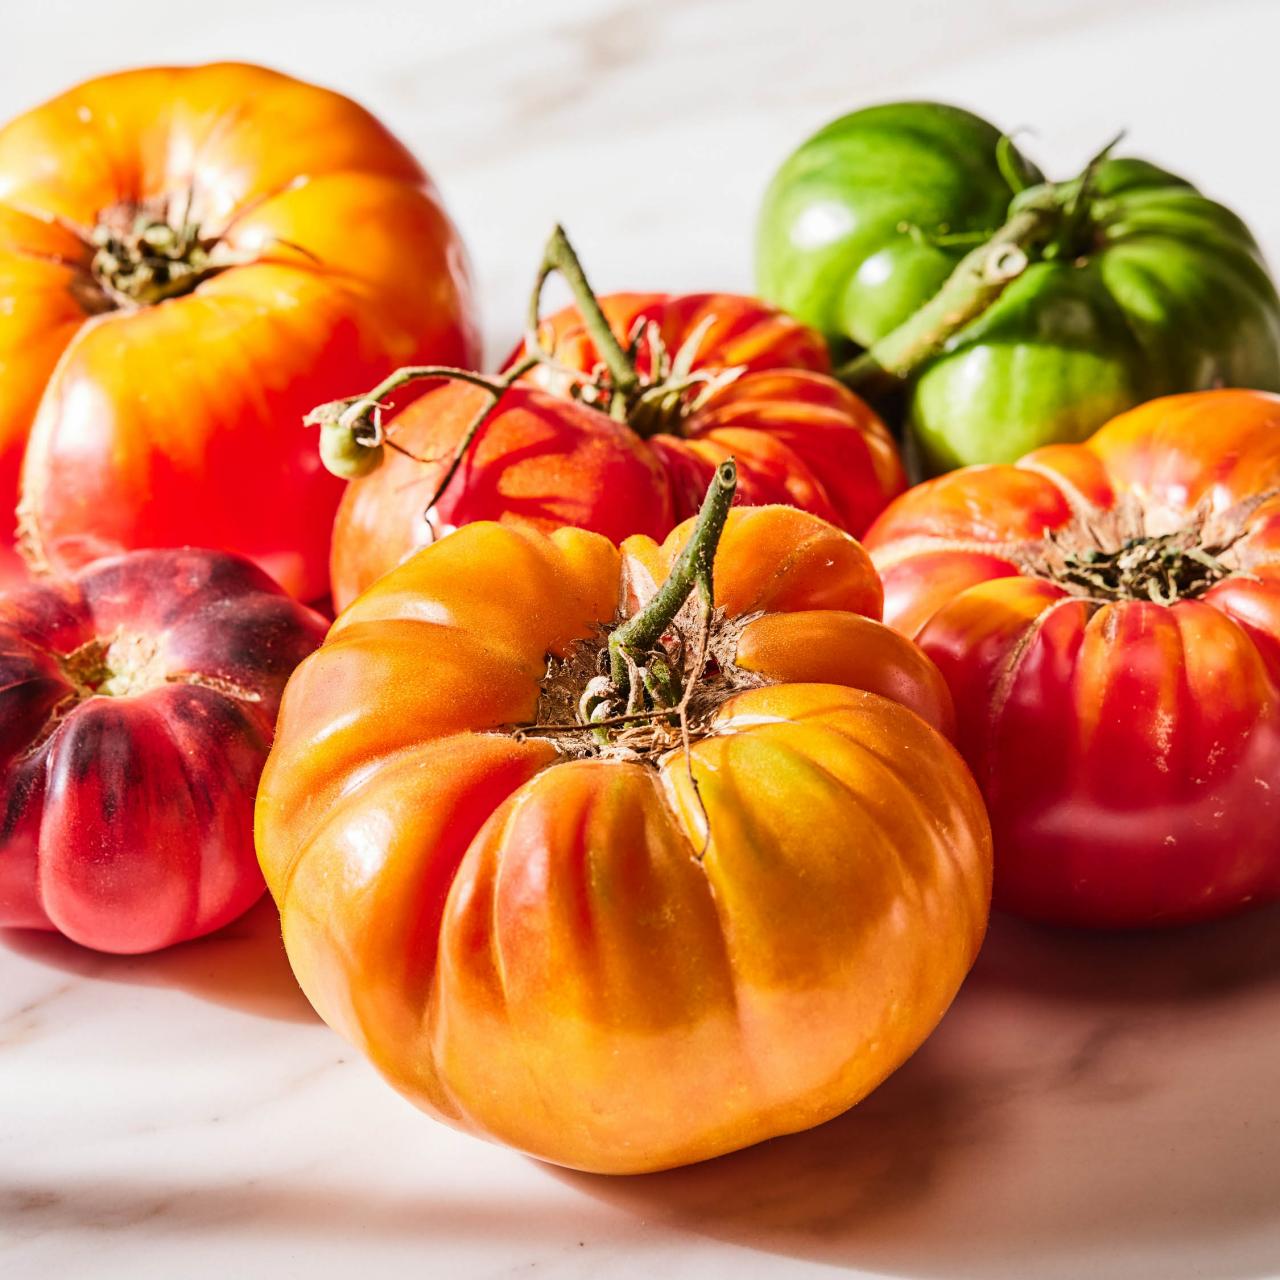 7 Popular Types of Tomatoes (and How to Use Them)